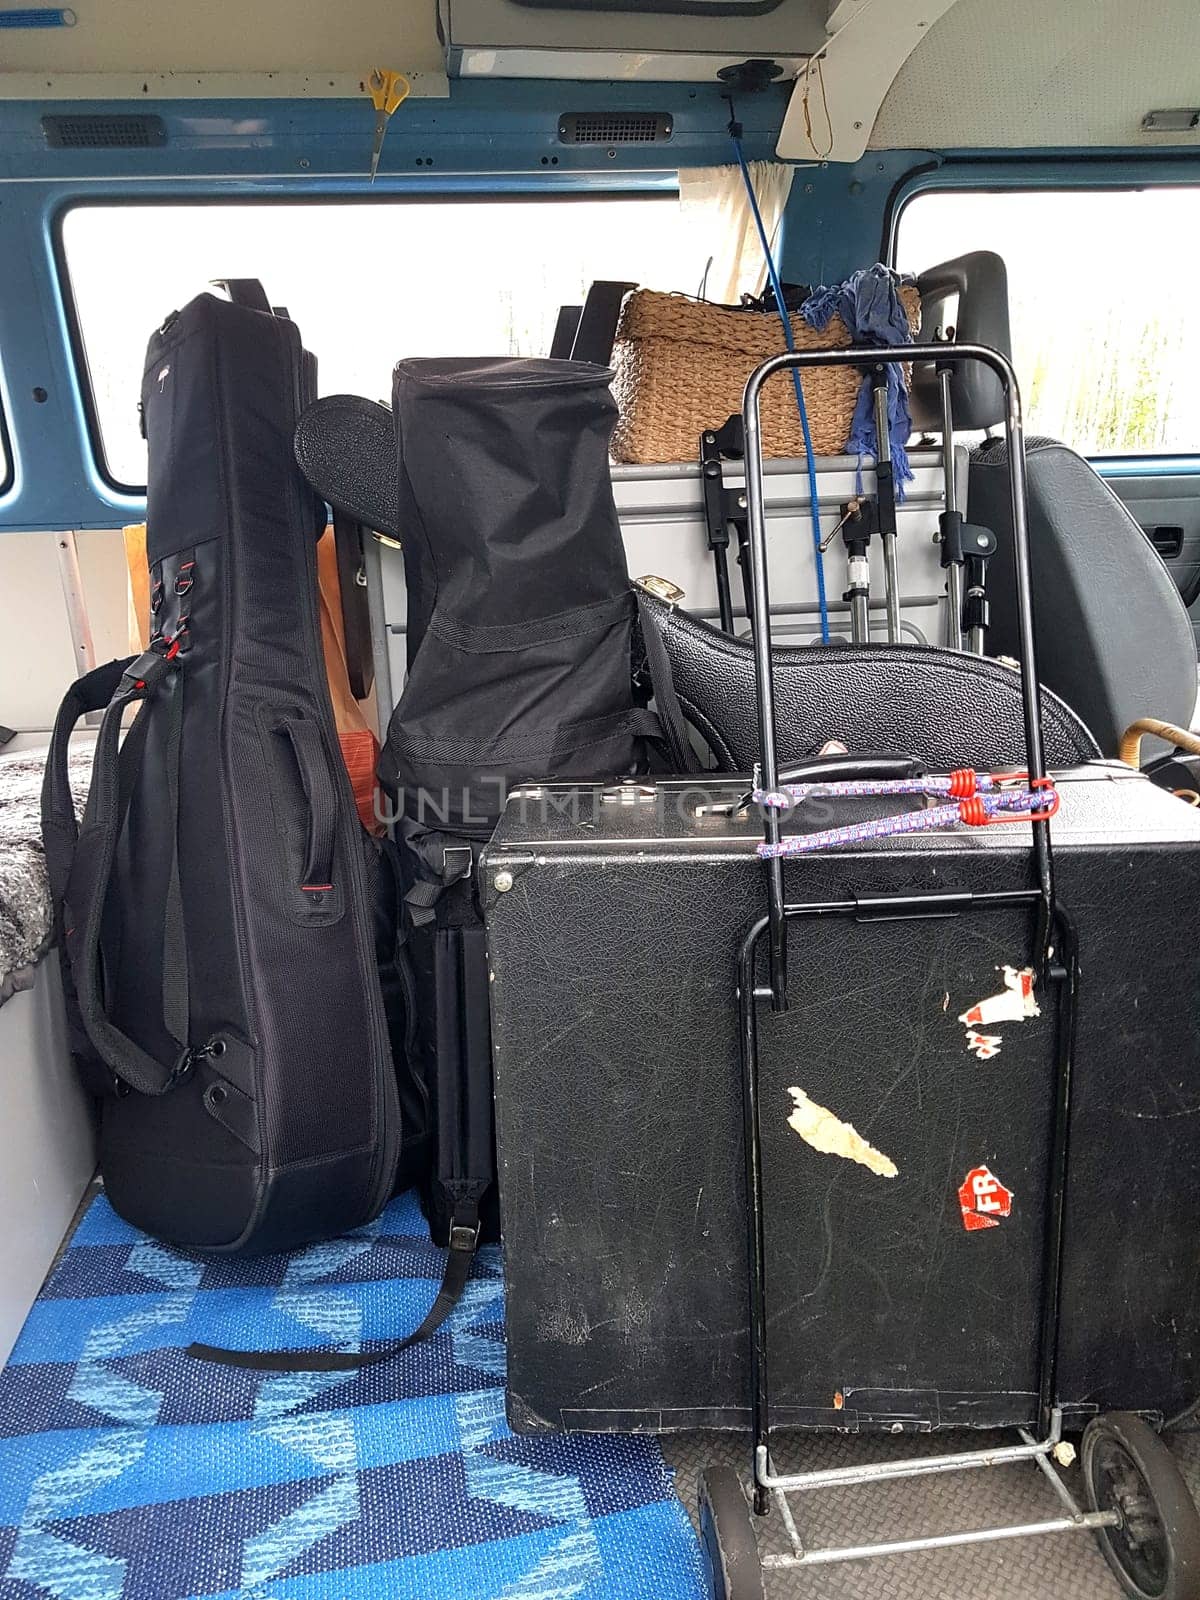 The instruments in the cases are loaded into the van and we are ready to go.